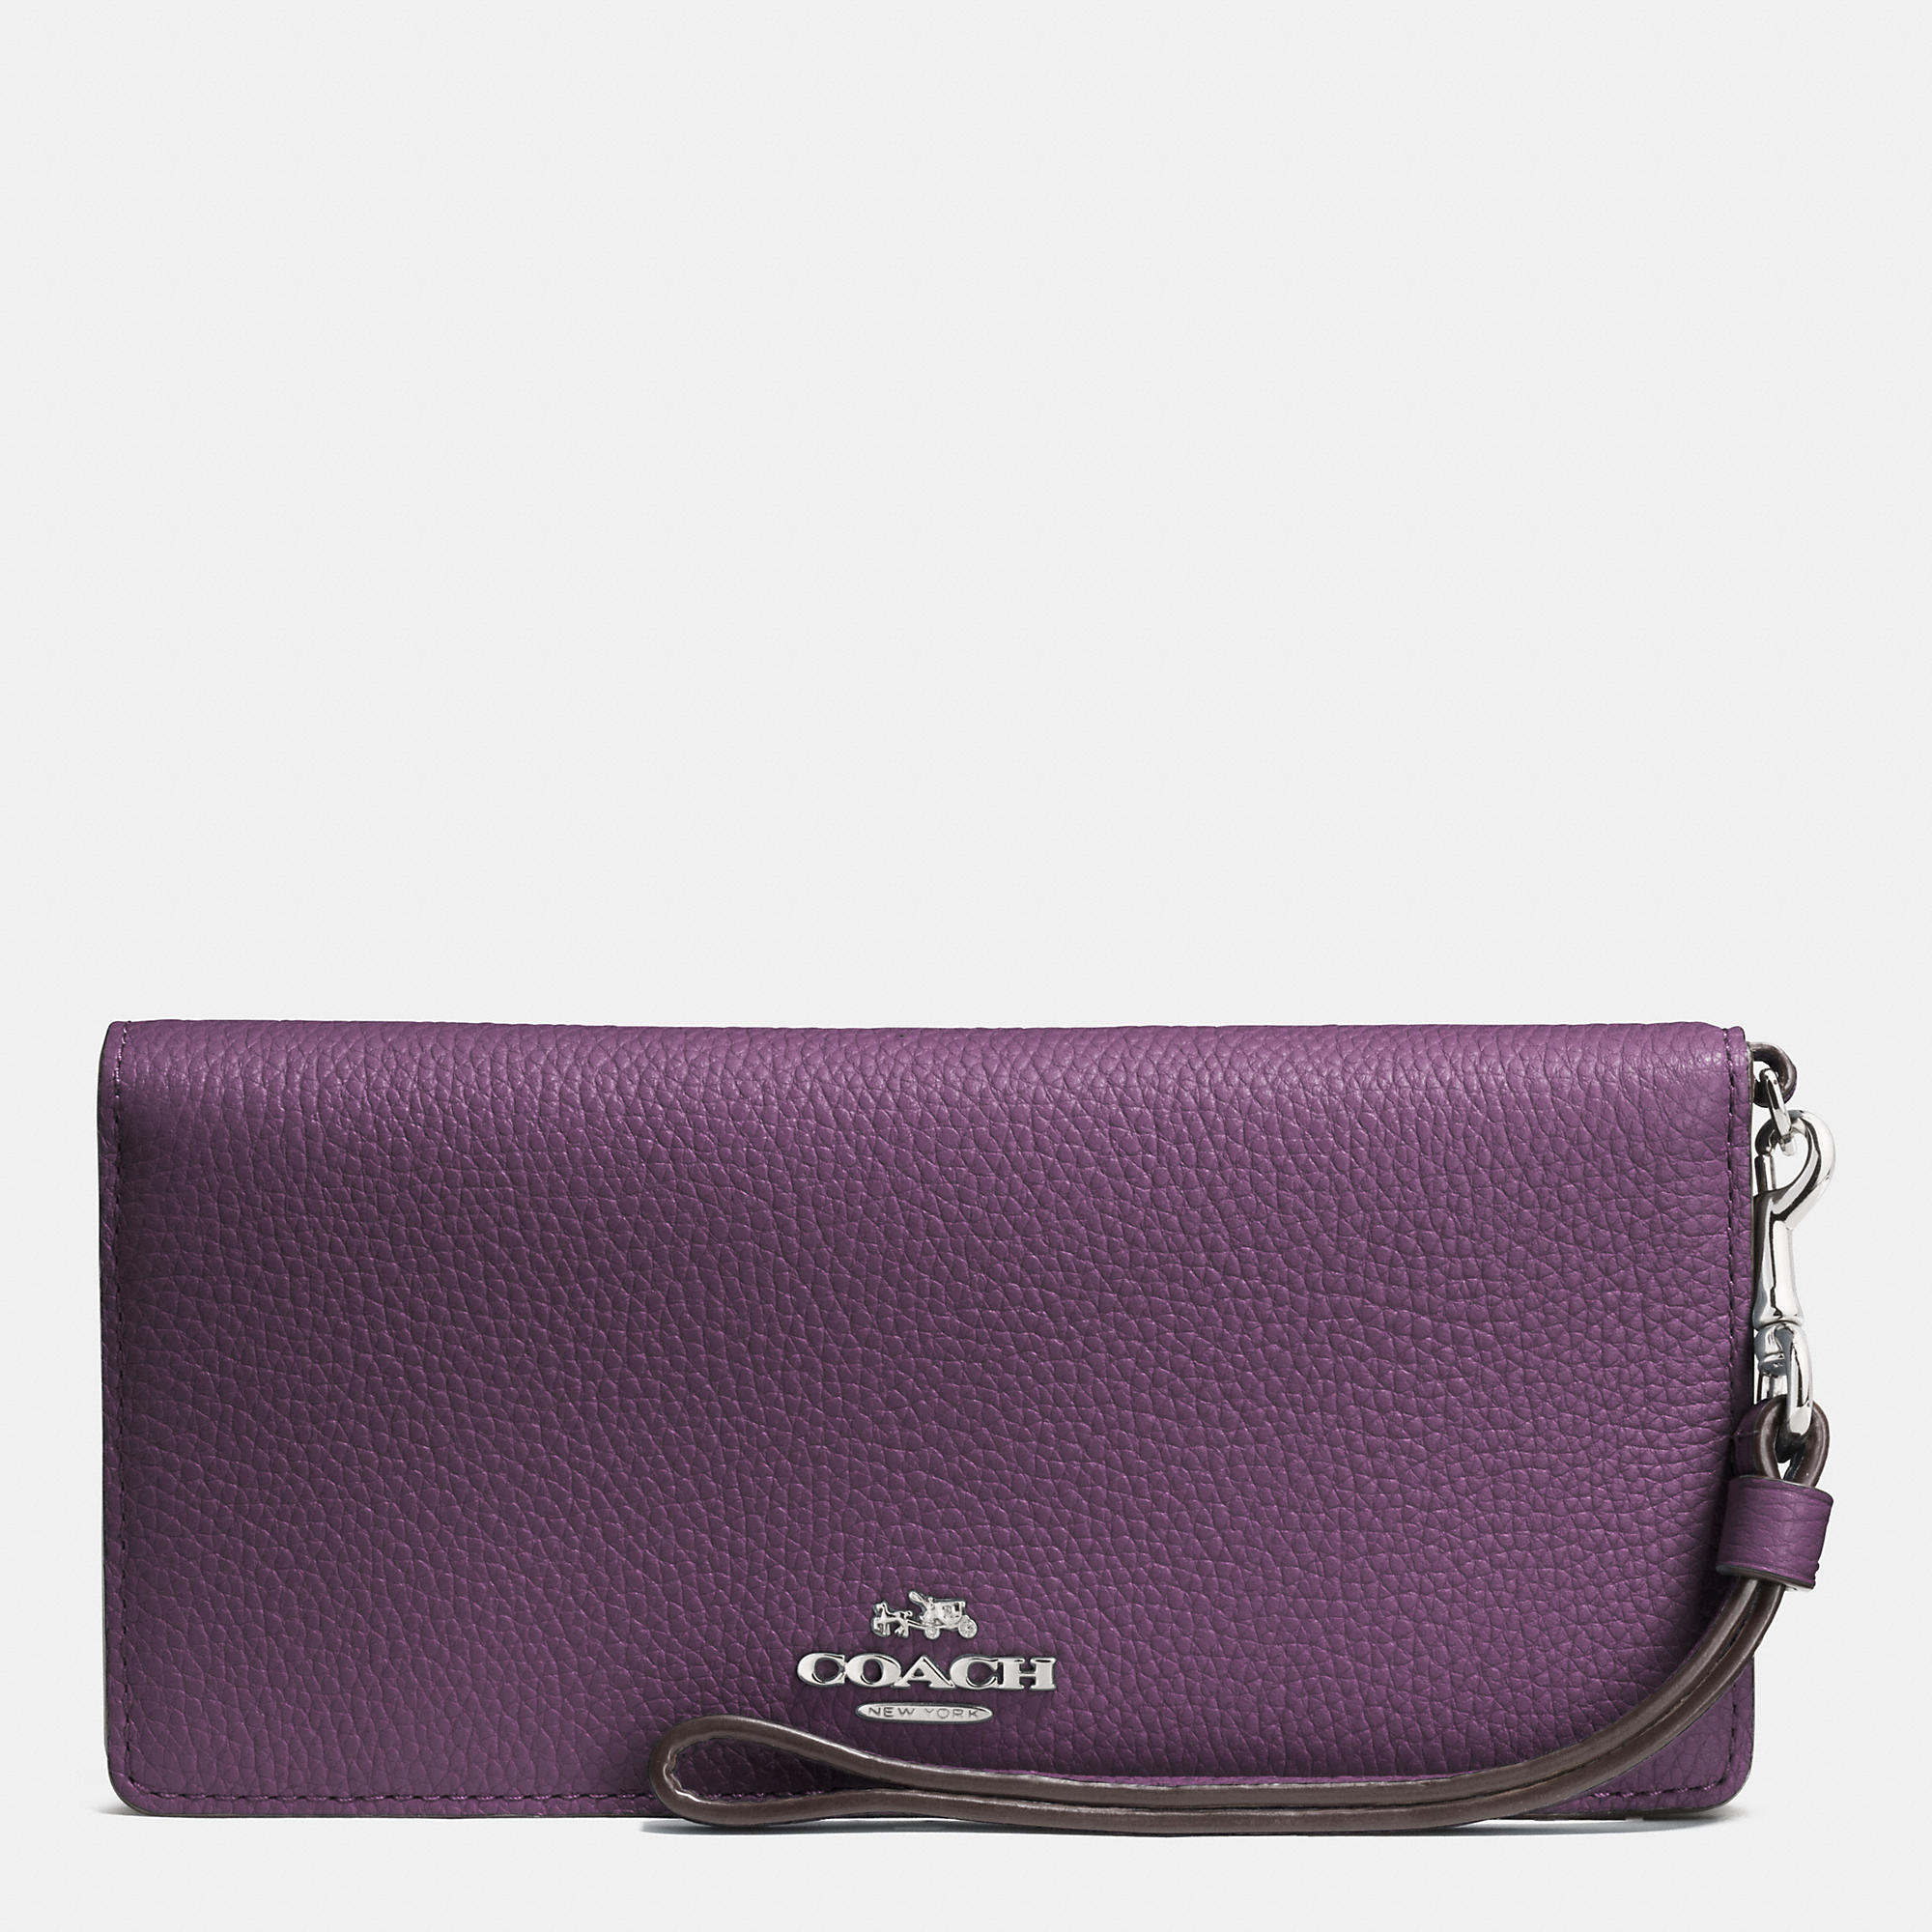 New Realer Coach Slim Wallet In Colorblock Leather | Coach Outlet Canada